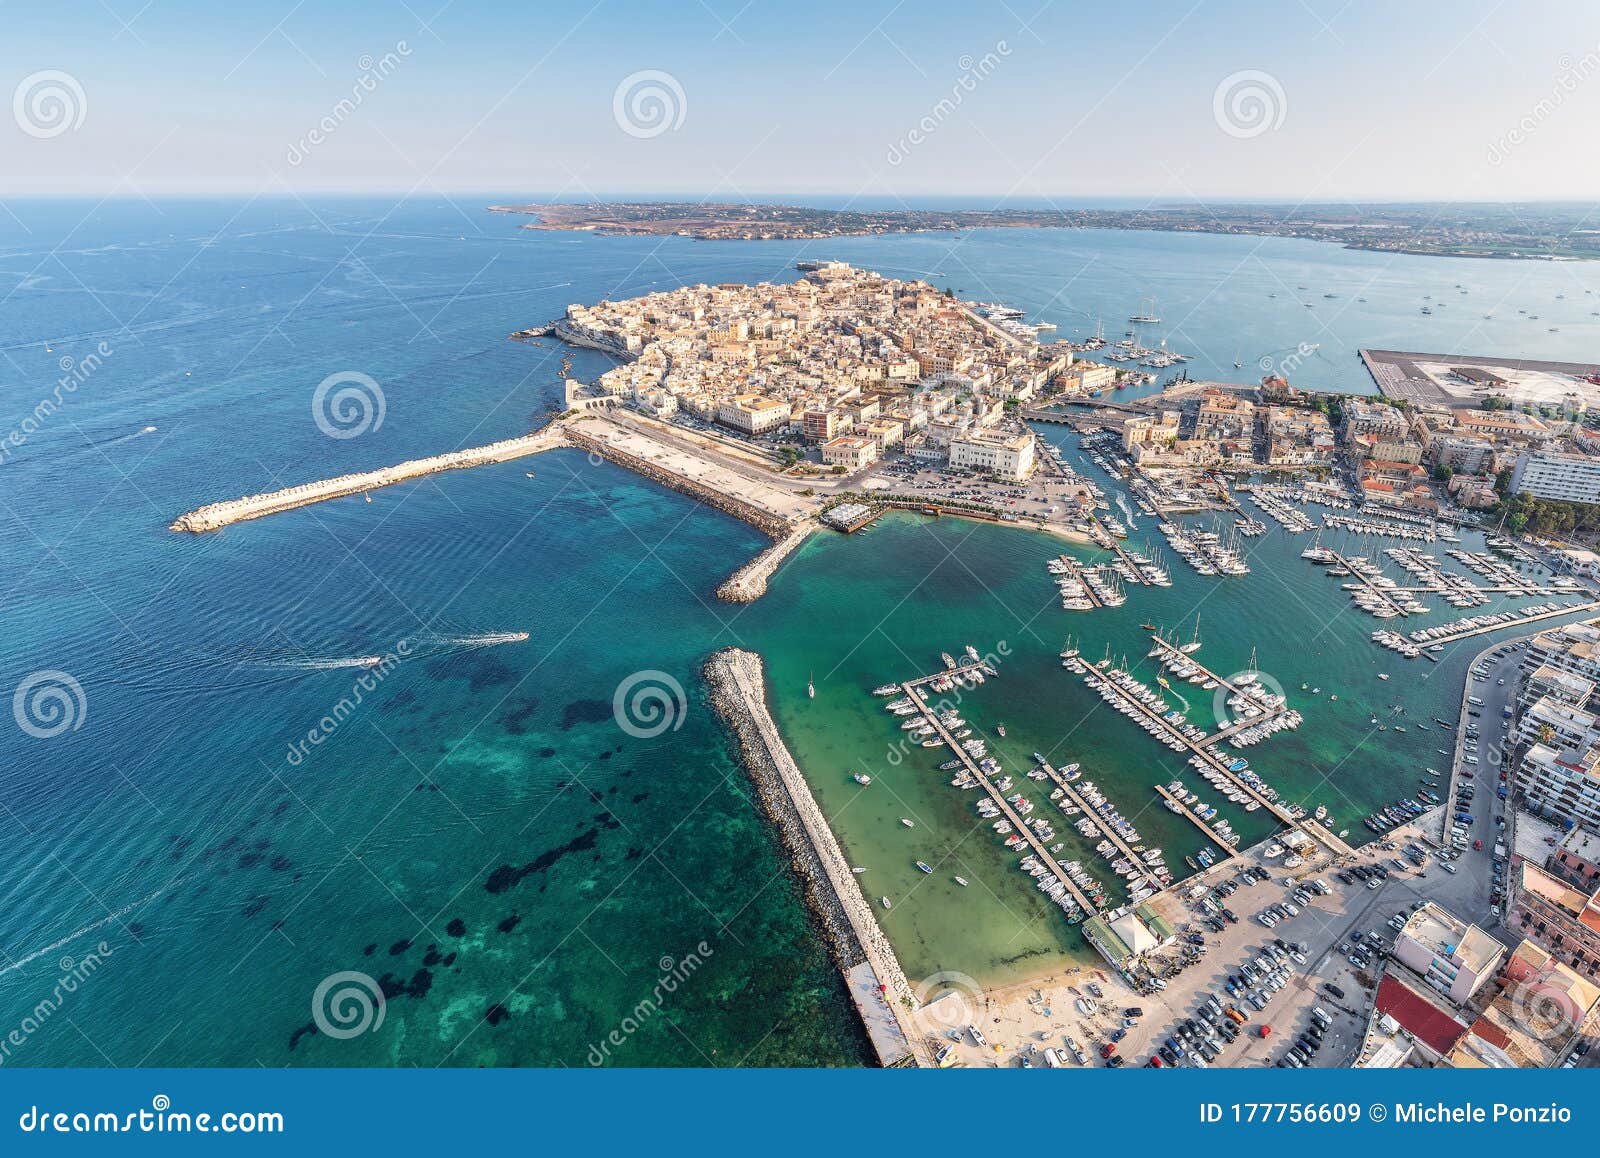 aerial view of the ortgia island in syracuse sicily